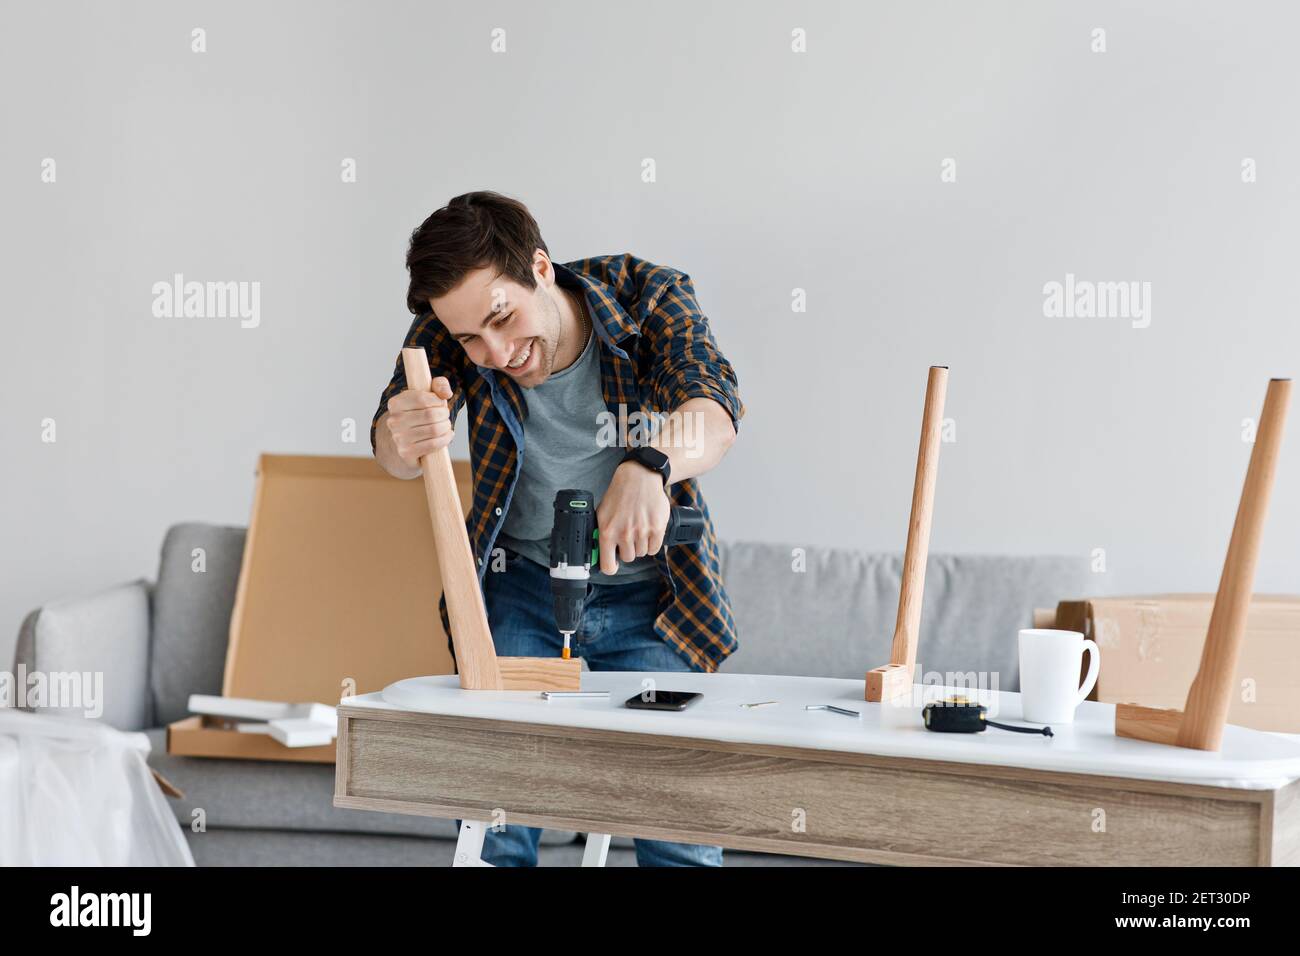 Great purchase, assembly of new furniture at home, housekeeping and good mood Stock Photo